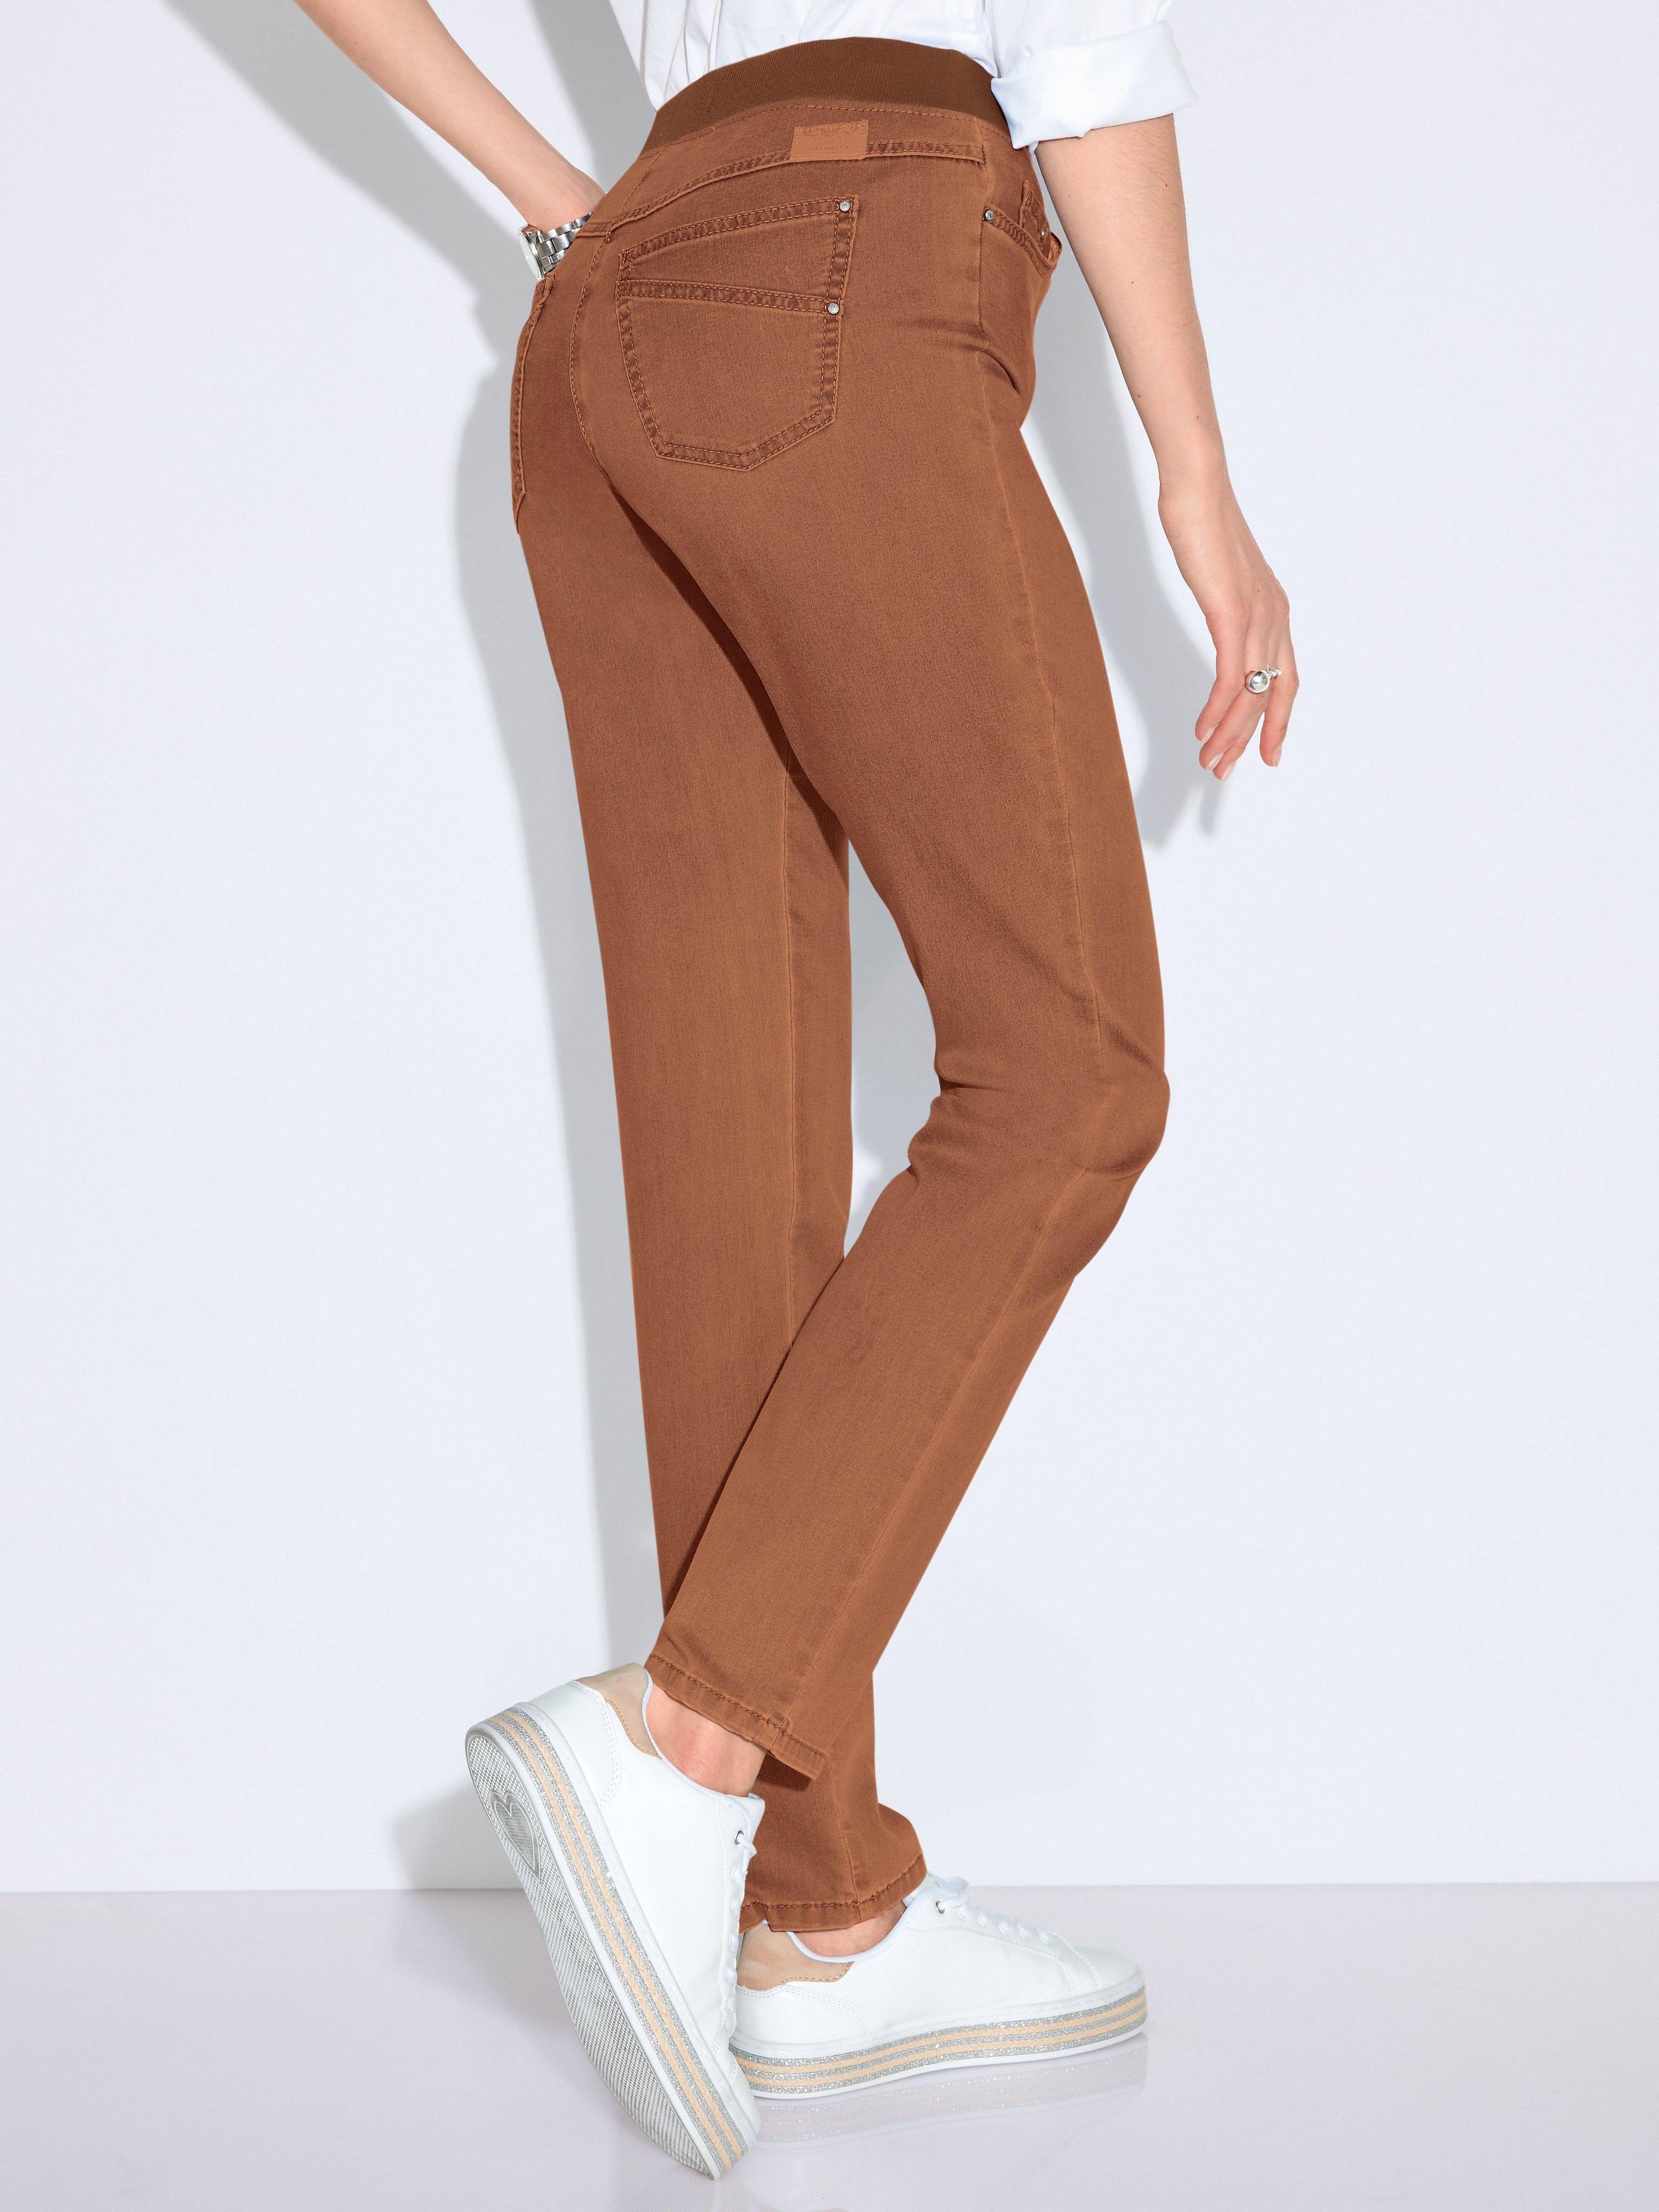 RAPHAELA by BRAX Comfort plus-jeans modell carina in Braun | Lyst AT